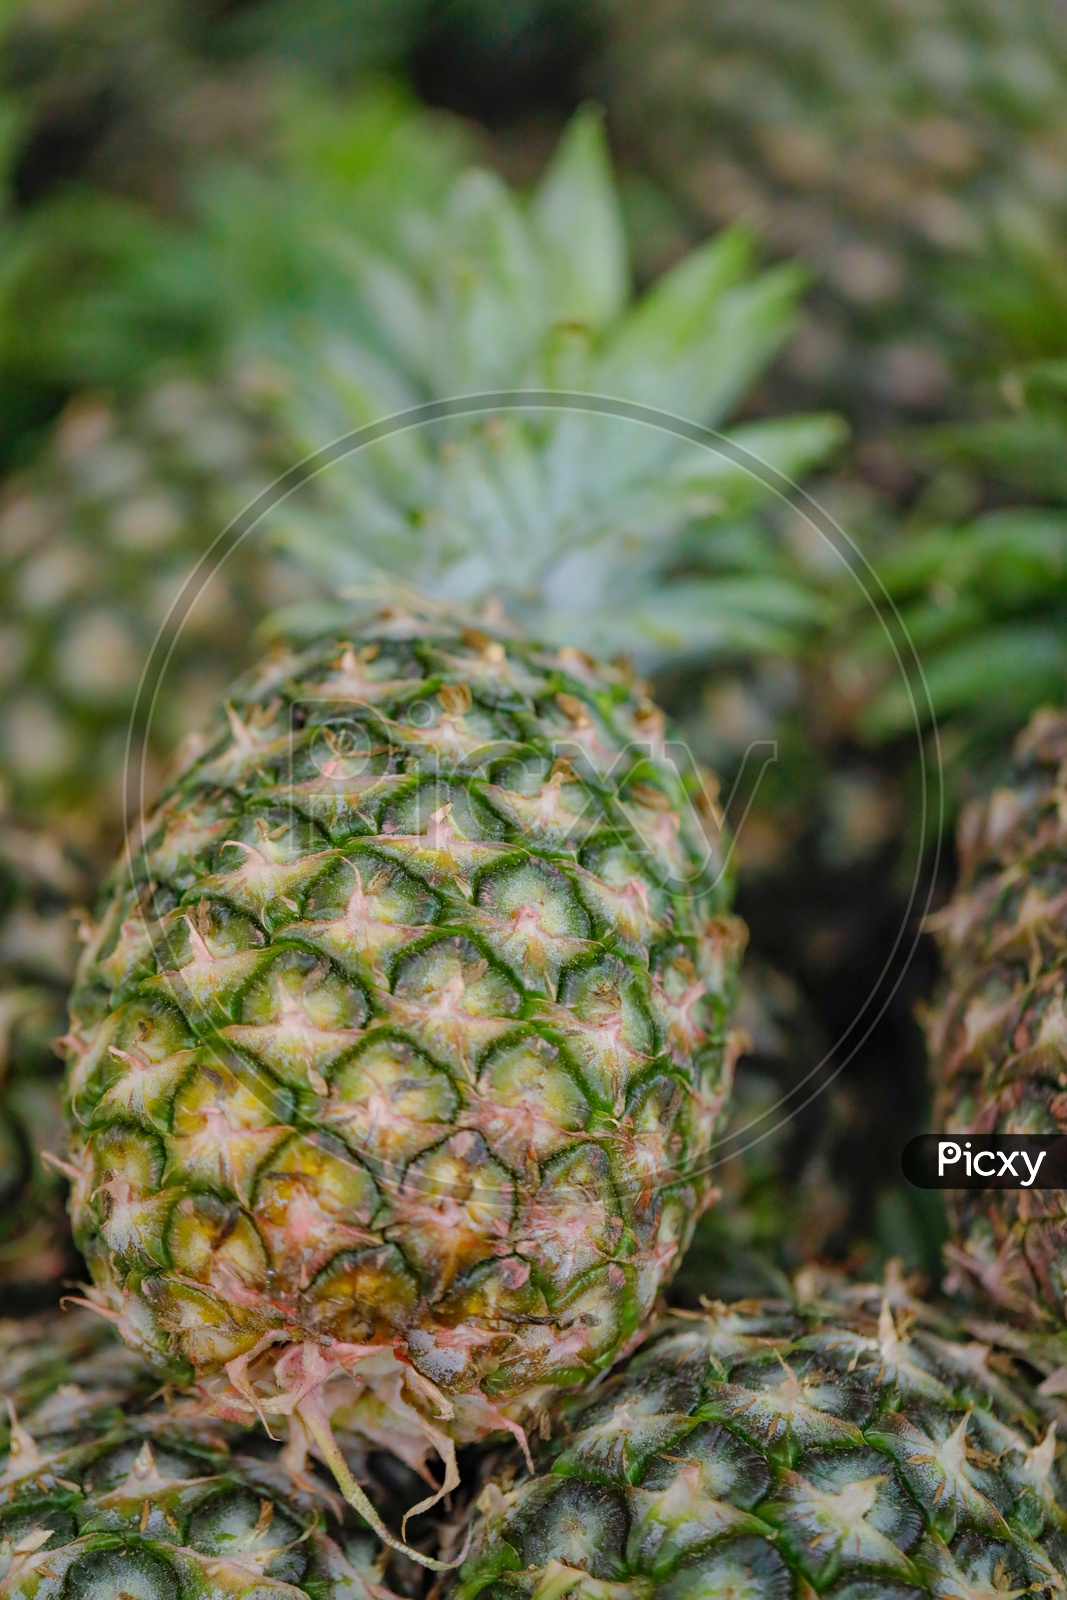 Pineapple  in a Fruit Vendor Shop Or Stall